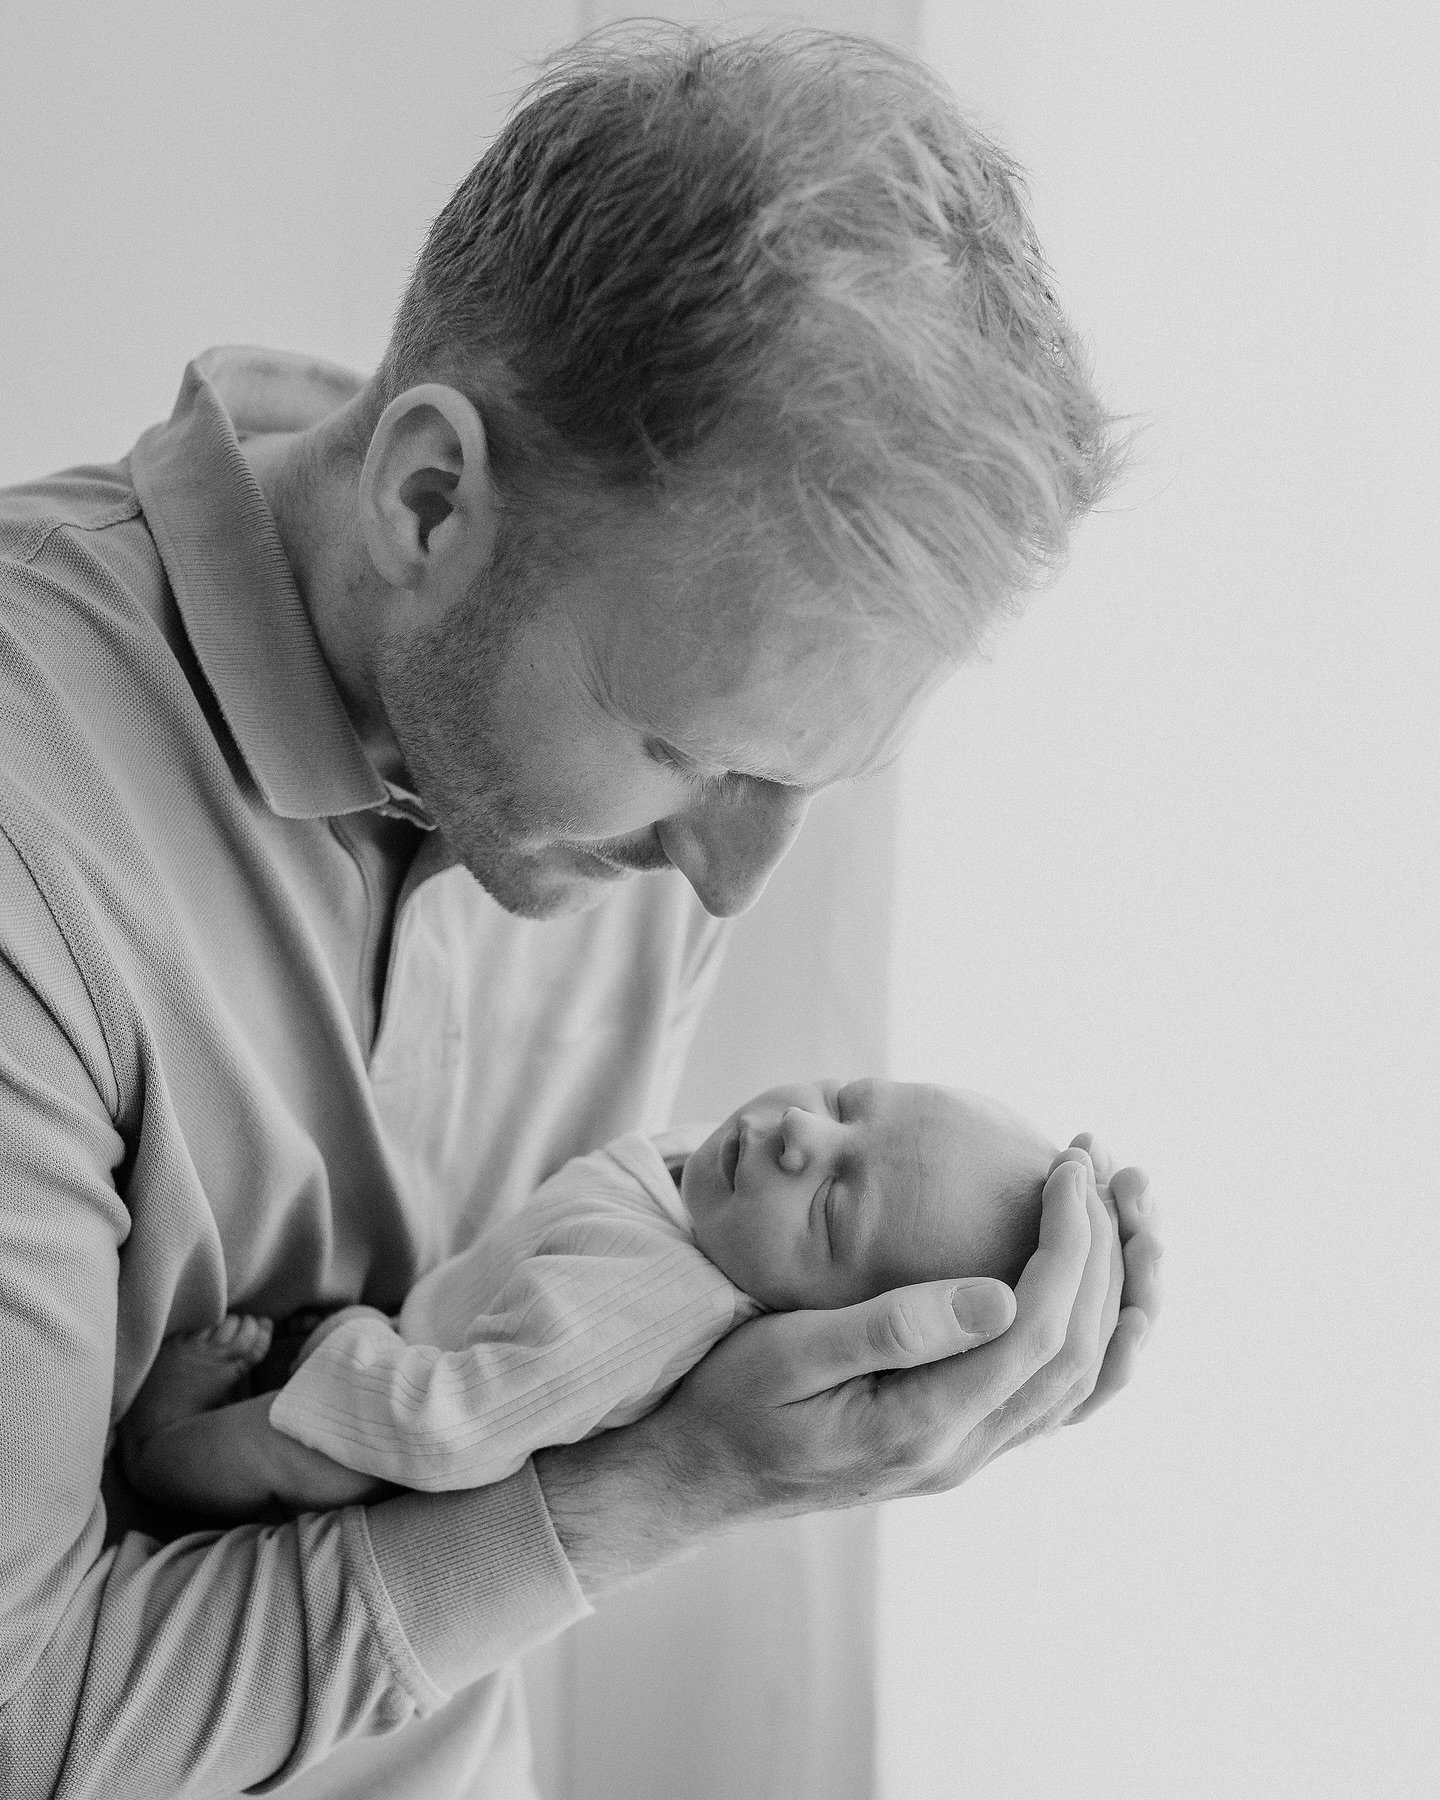 Throughout all of my sessions, especially my newborn, I will always include individuals of dads and baby, mums and baby, siblings and baby, as well as groups and portraits ofcourse. 

This frame I use quite often with dads and baby portraits &mdash; 